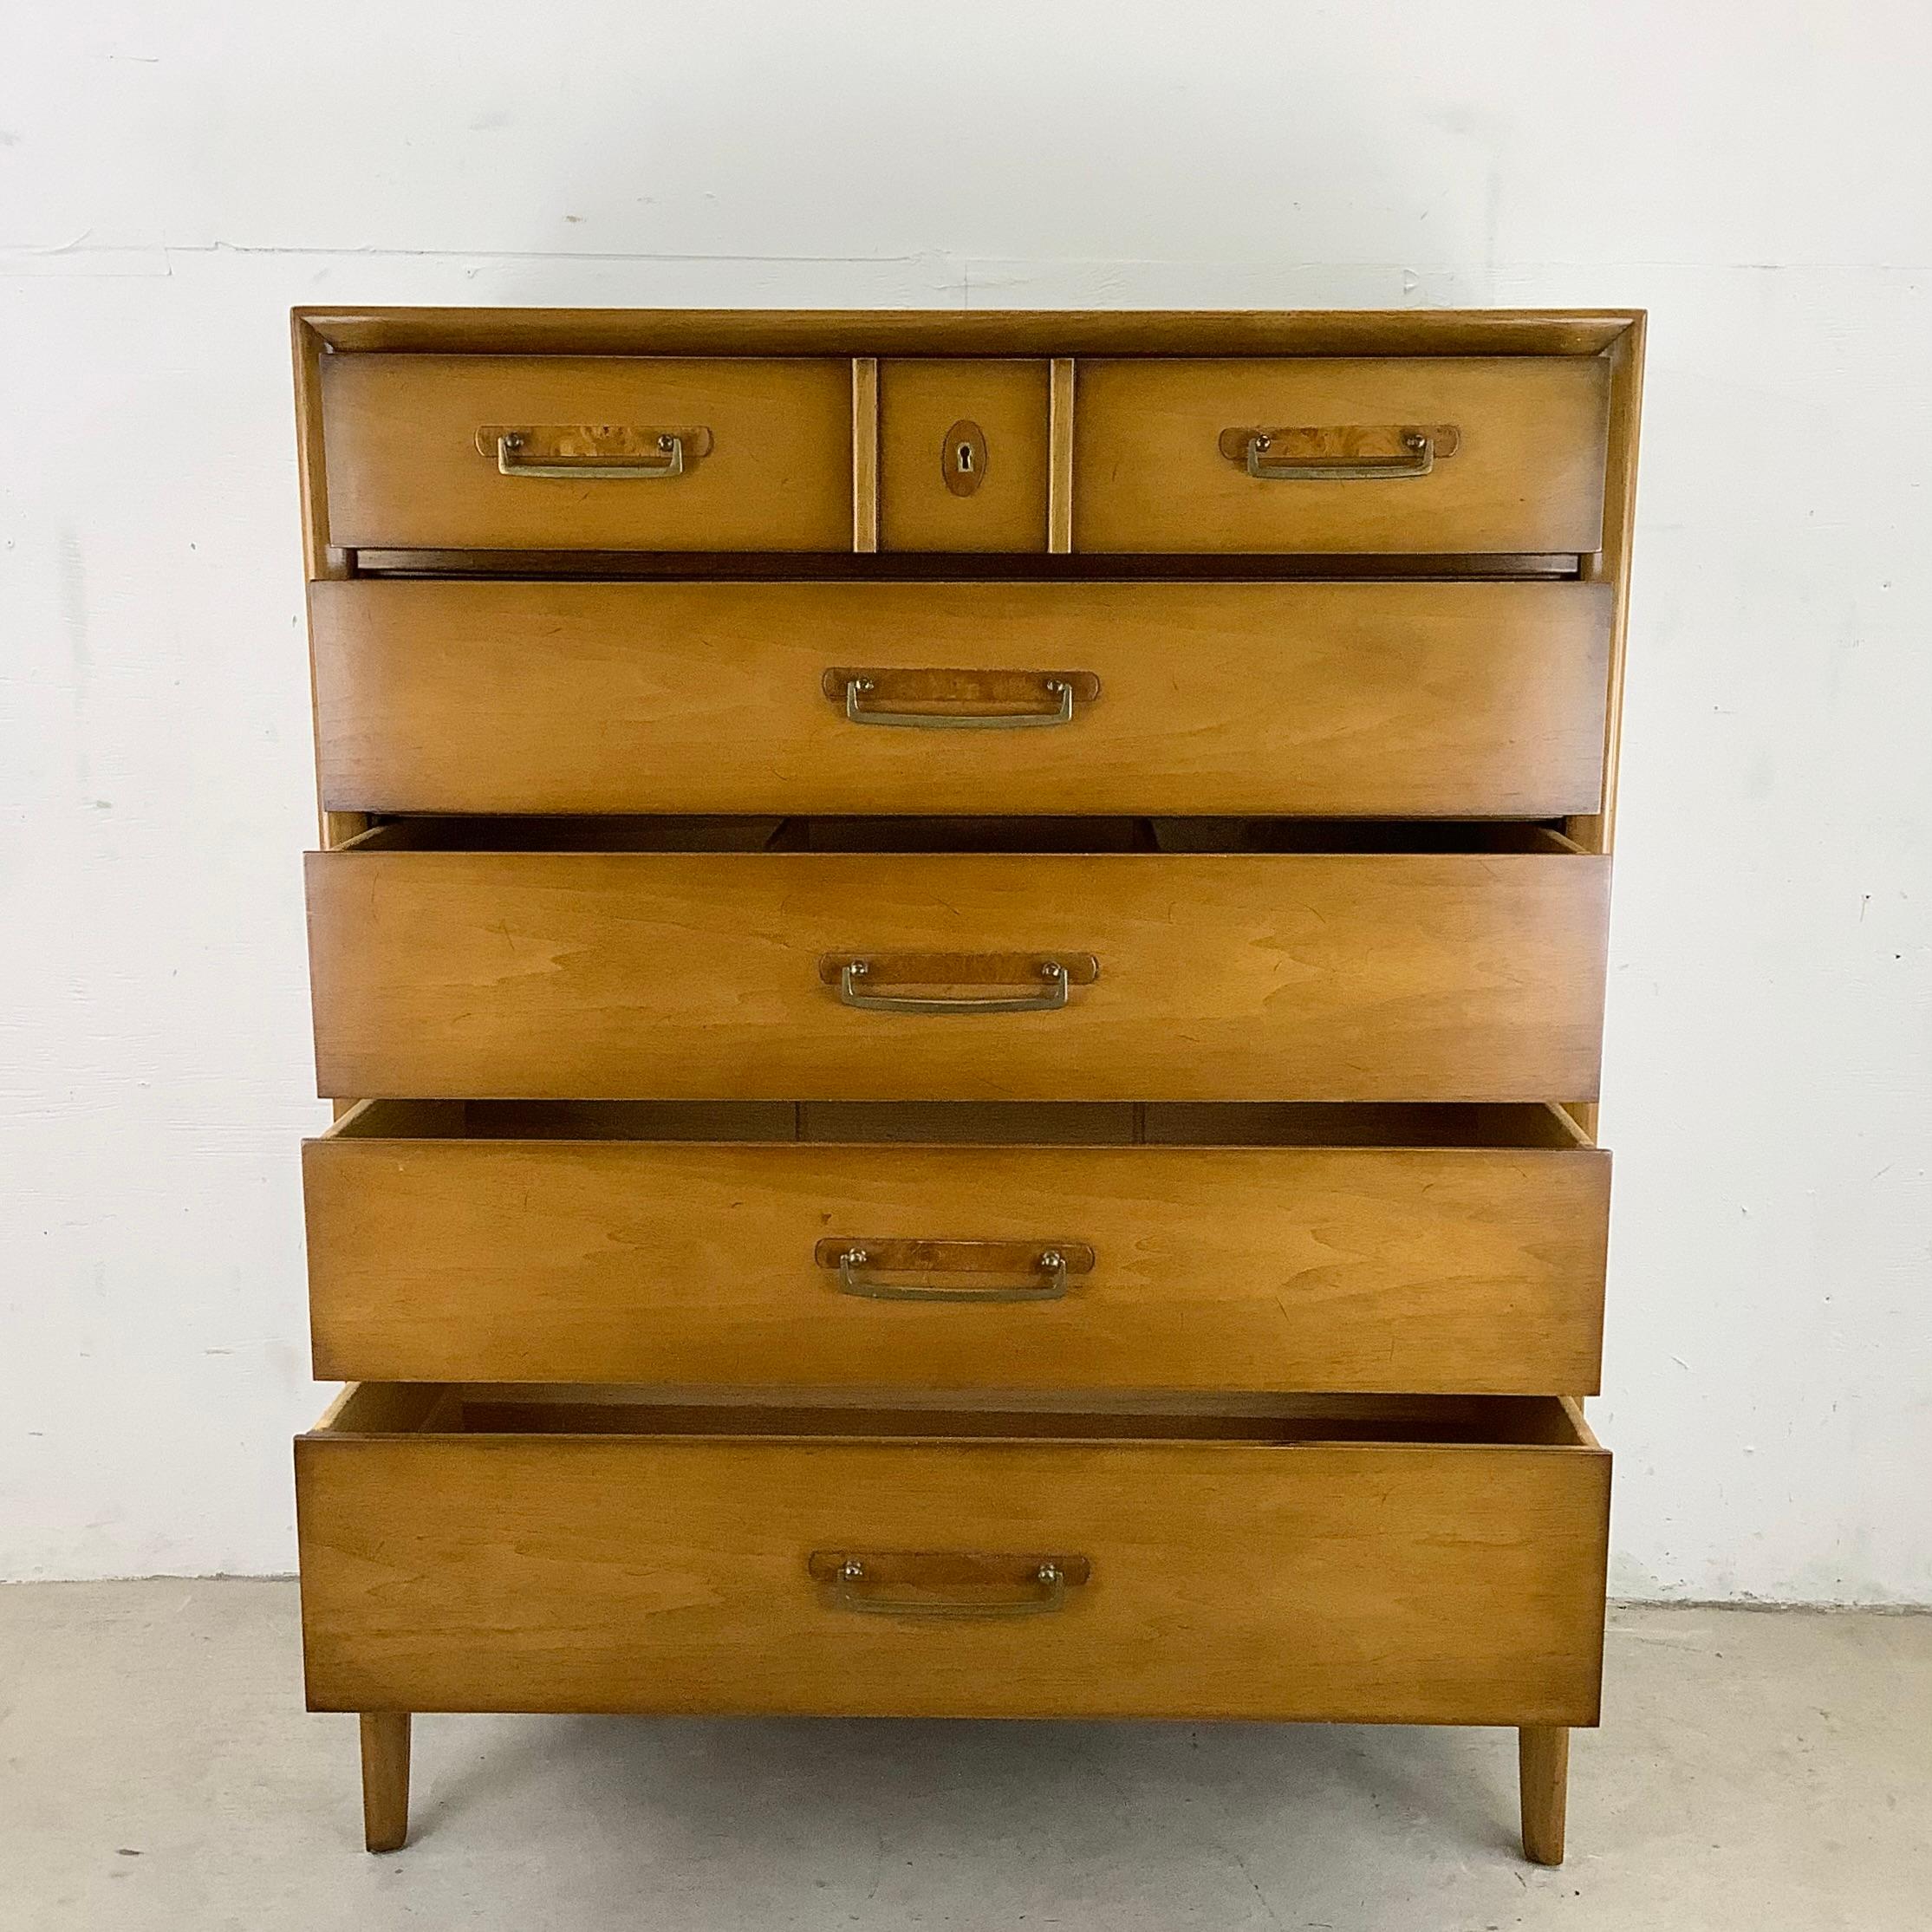 This mid-century highboy dresser from the Drexel 